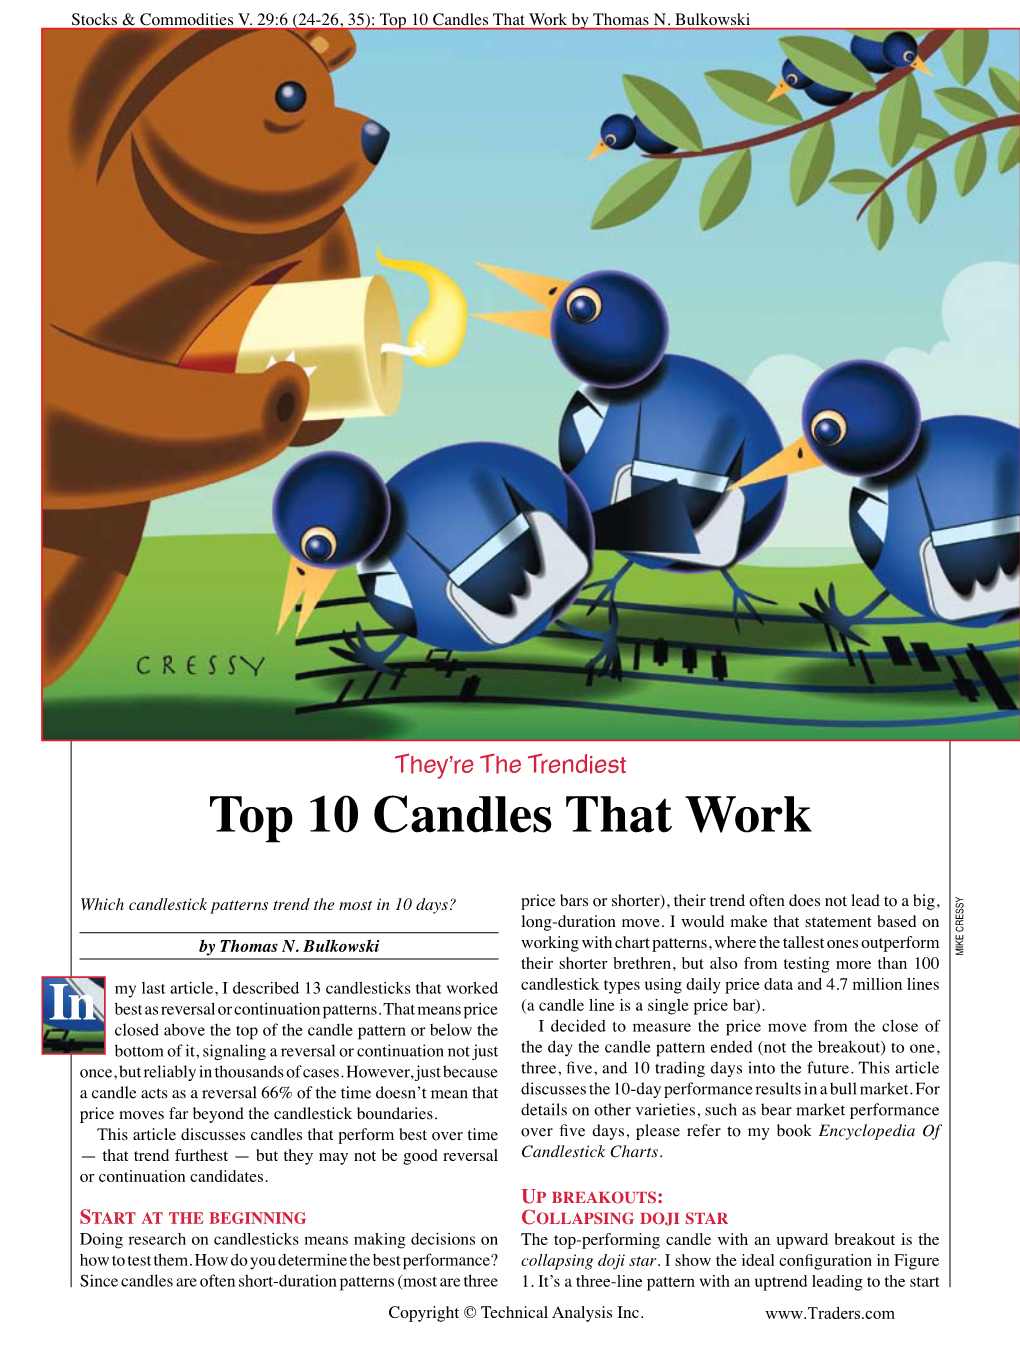 Top 10 Candles That Work In